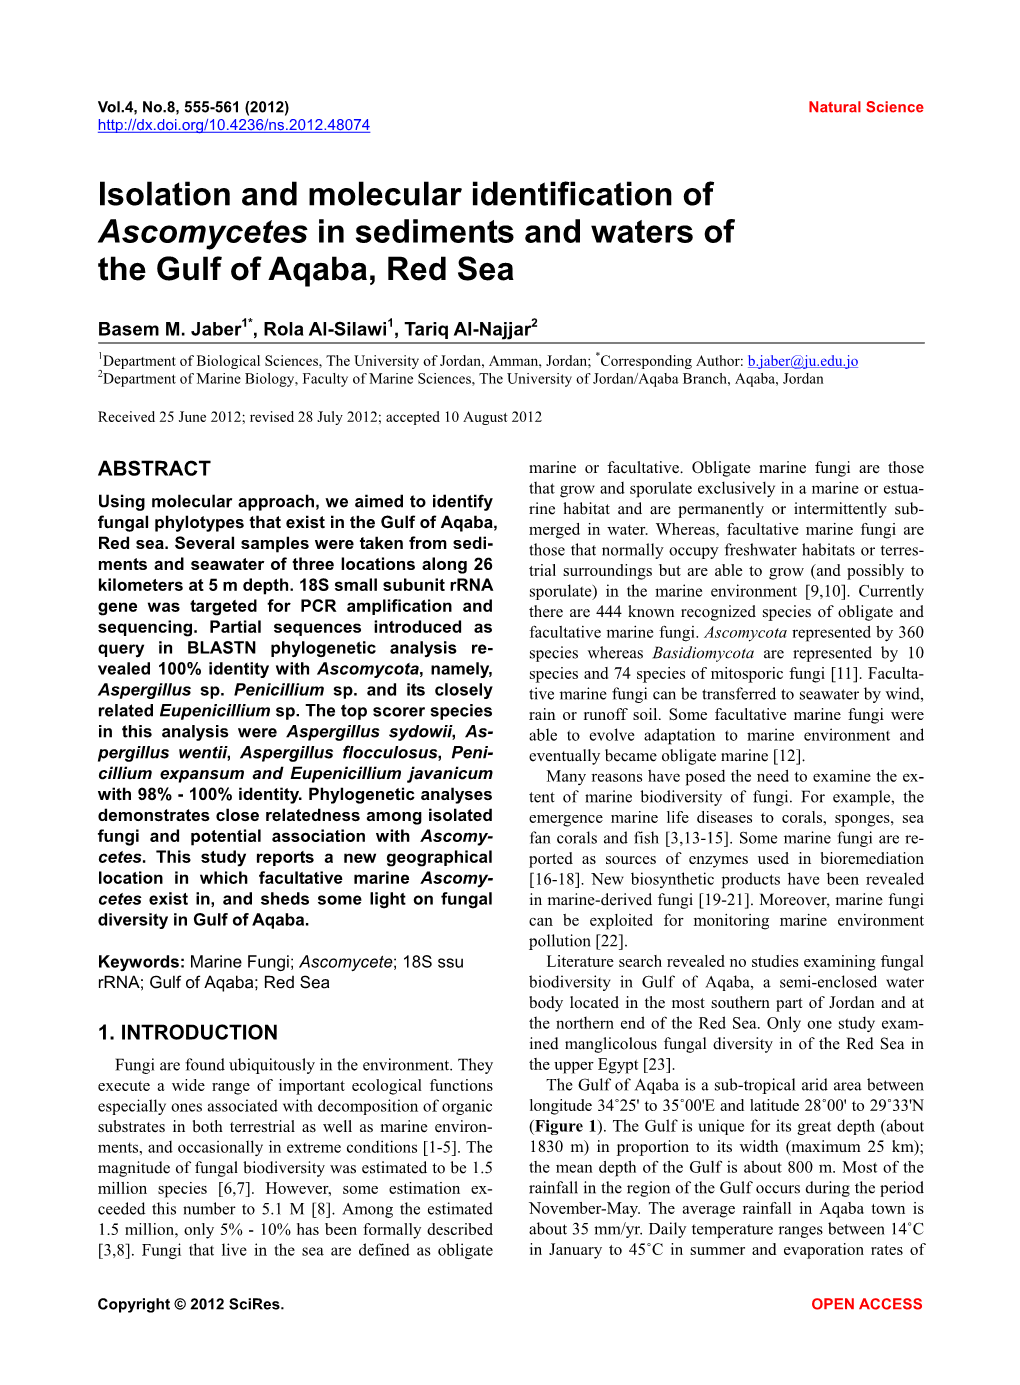 Isolation and Molecular Identification of Ascomycetes in Sediments and Waters of the Gulf of Aqaba, Red Sea